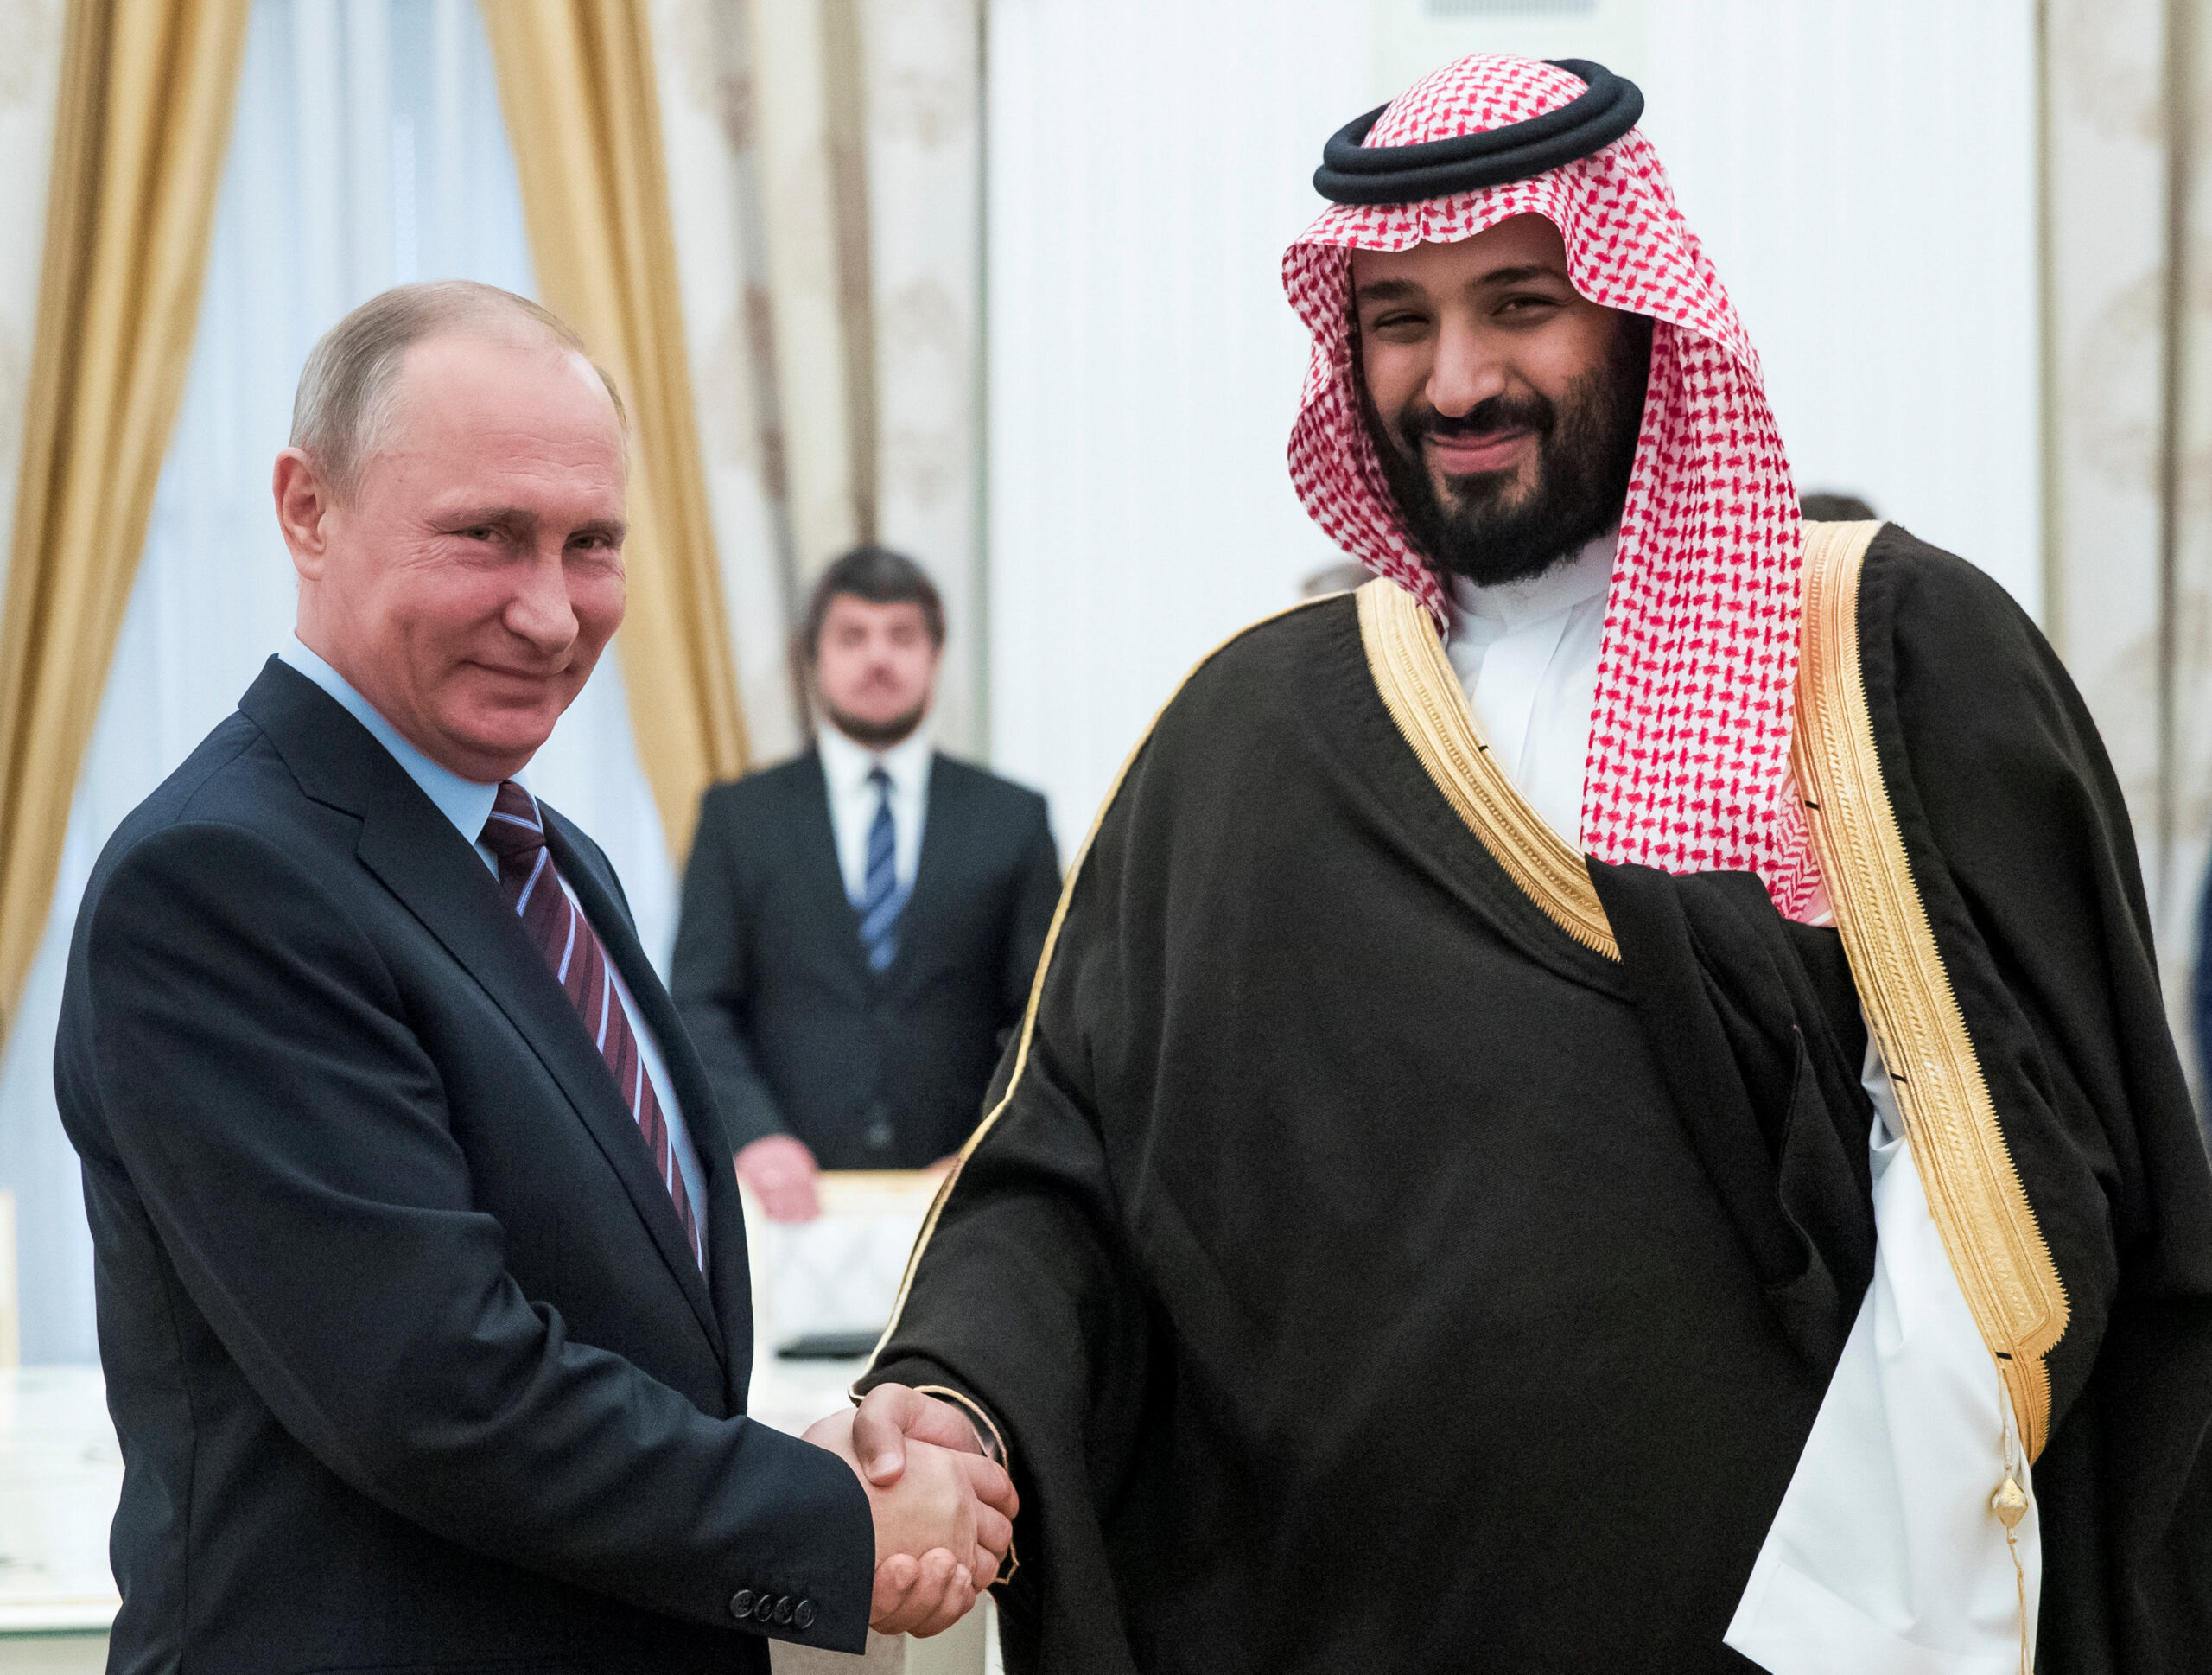 Putin discussed the oil market with the Crown Prince of Saudi Arabia